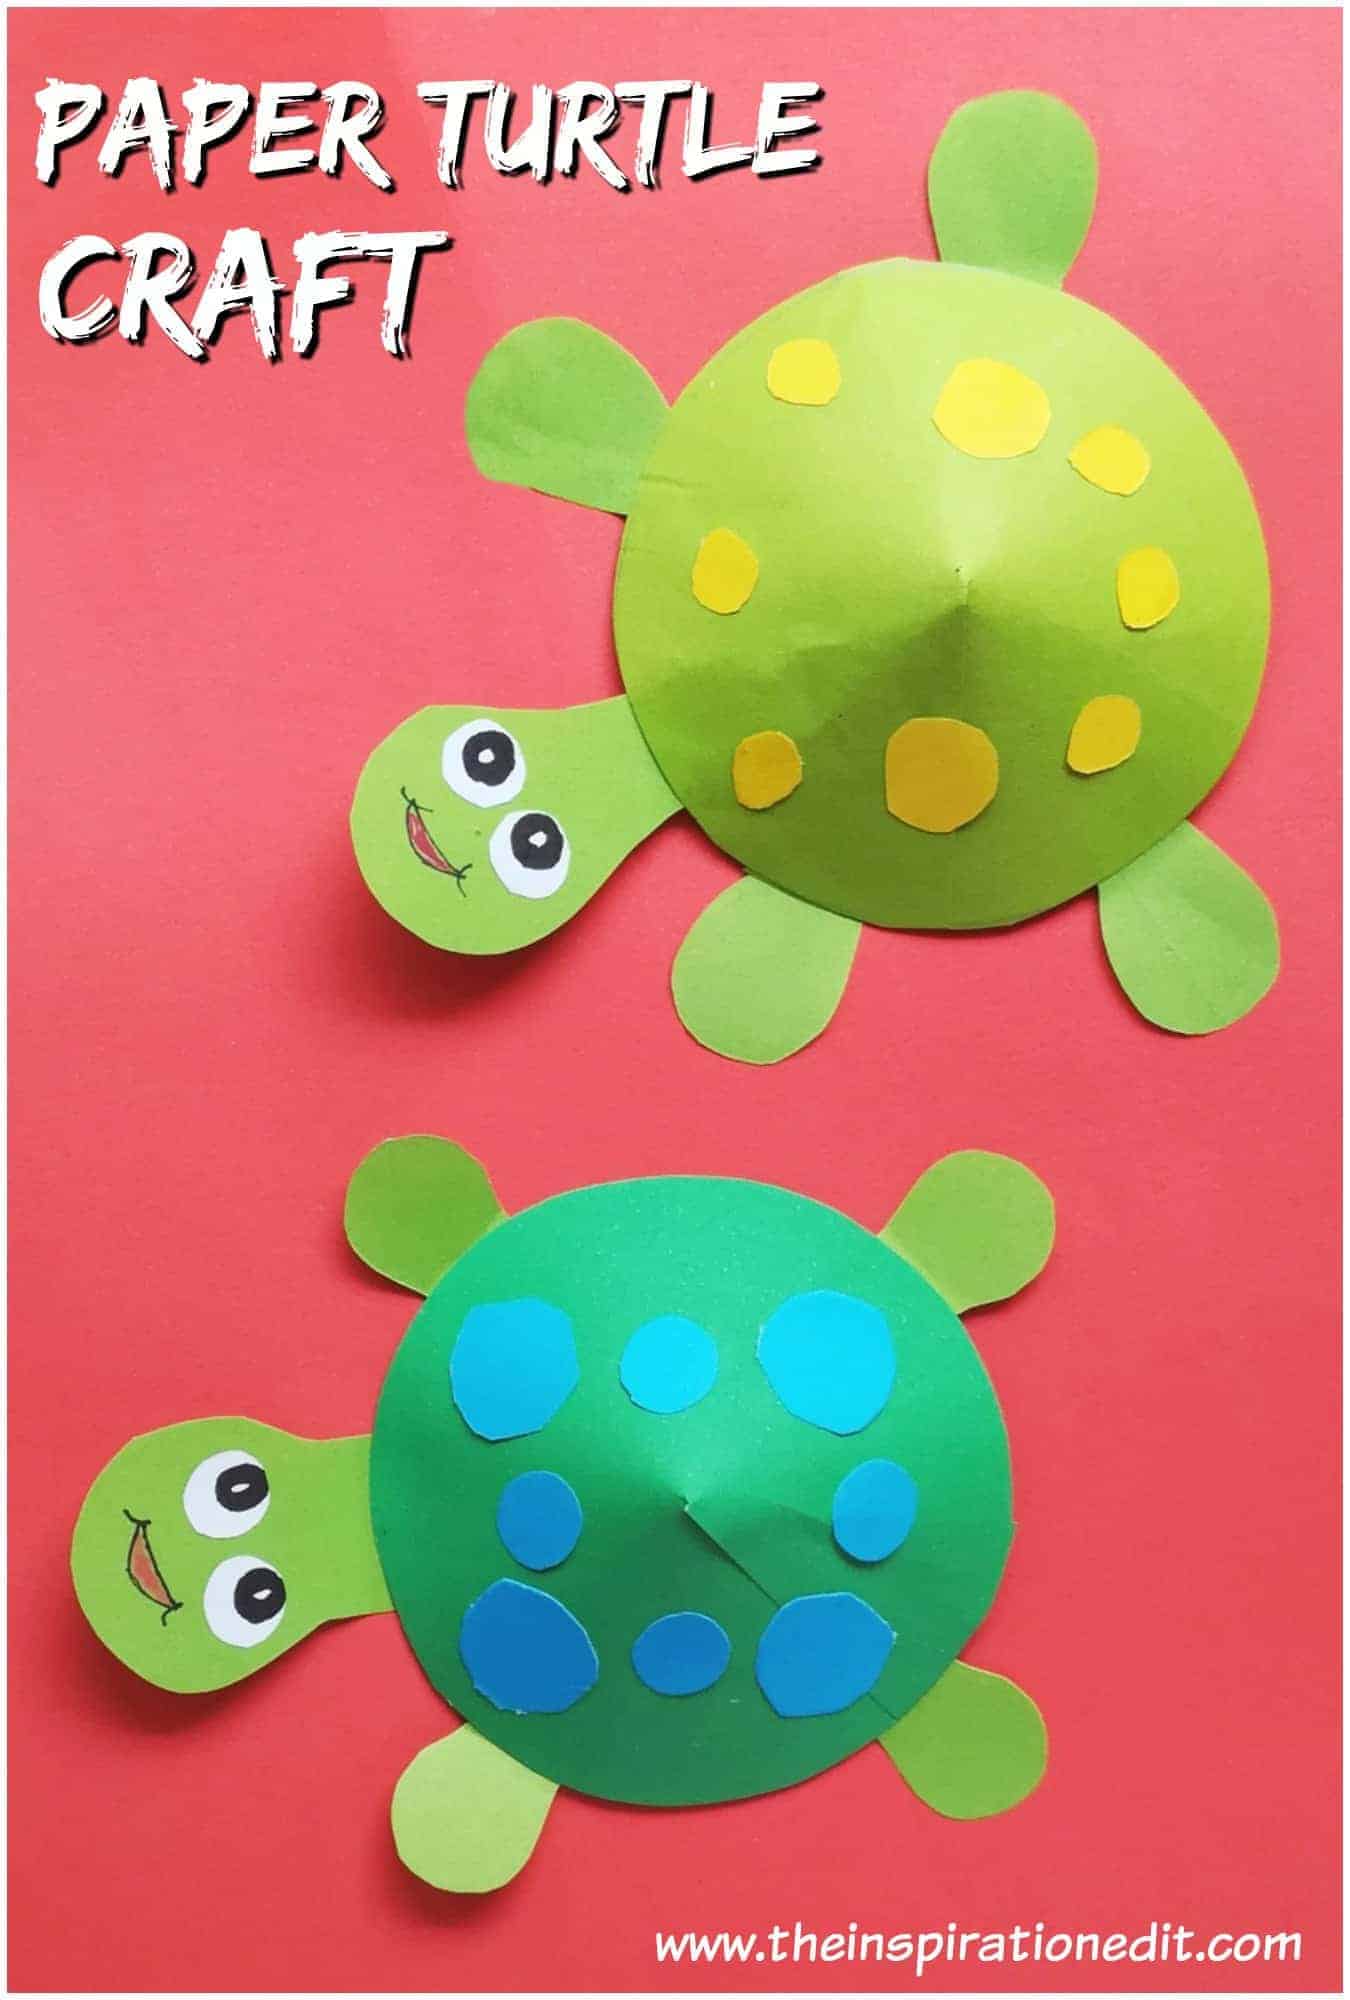 Paper Turtle Craft to Do with Kids · The Inspiration Edit